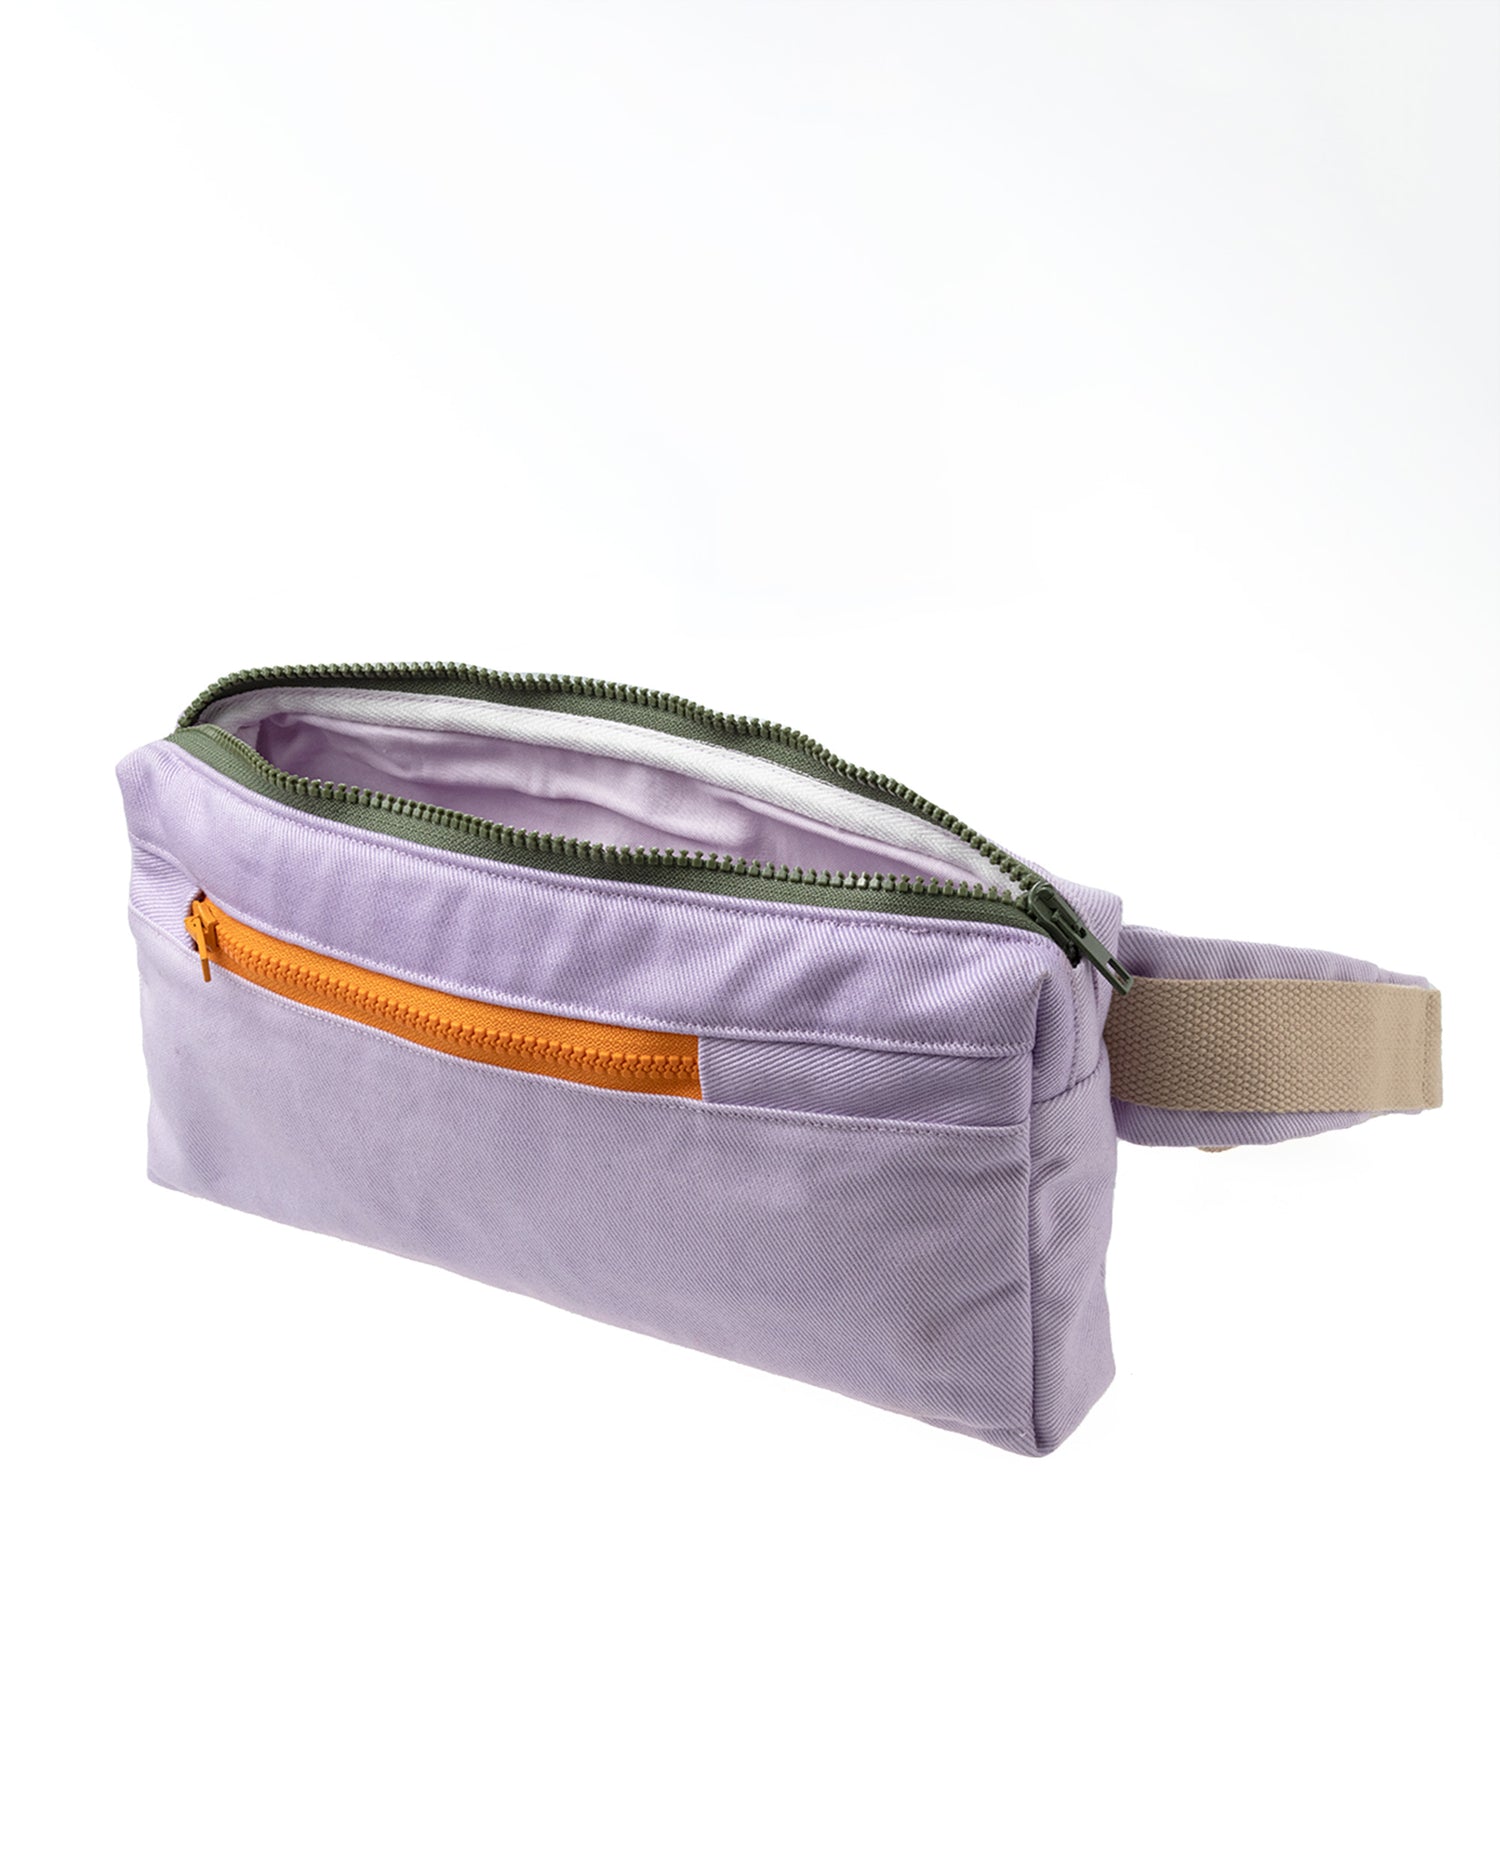 Bumbag made from reclaimed canvas in lavender with an orange zipper and a large blue buckle